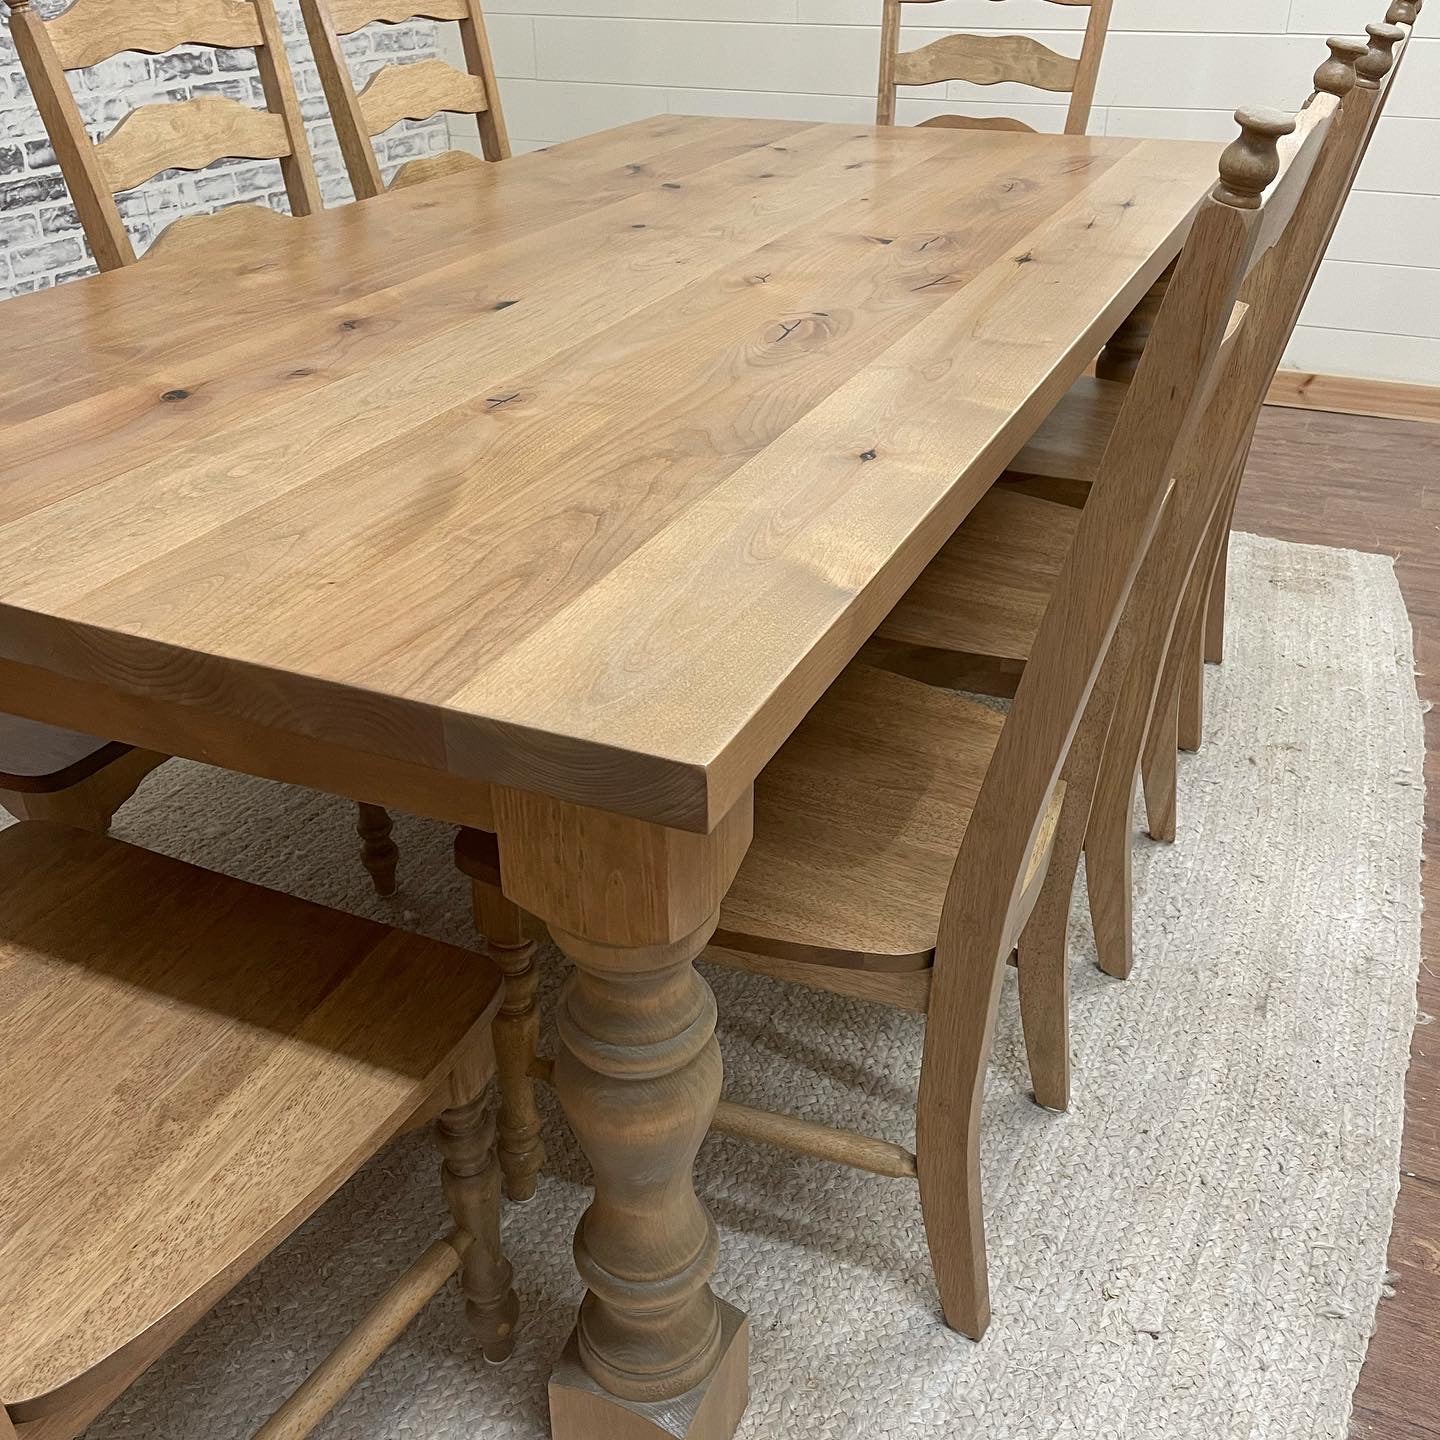 Pictured with an 8' L x 42" W Rustic Alder top and Pine legs stained Weathered Oak. Pictured with 8 Maine Ladder Back Chairs. 